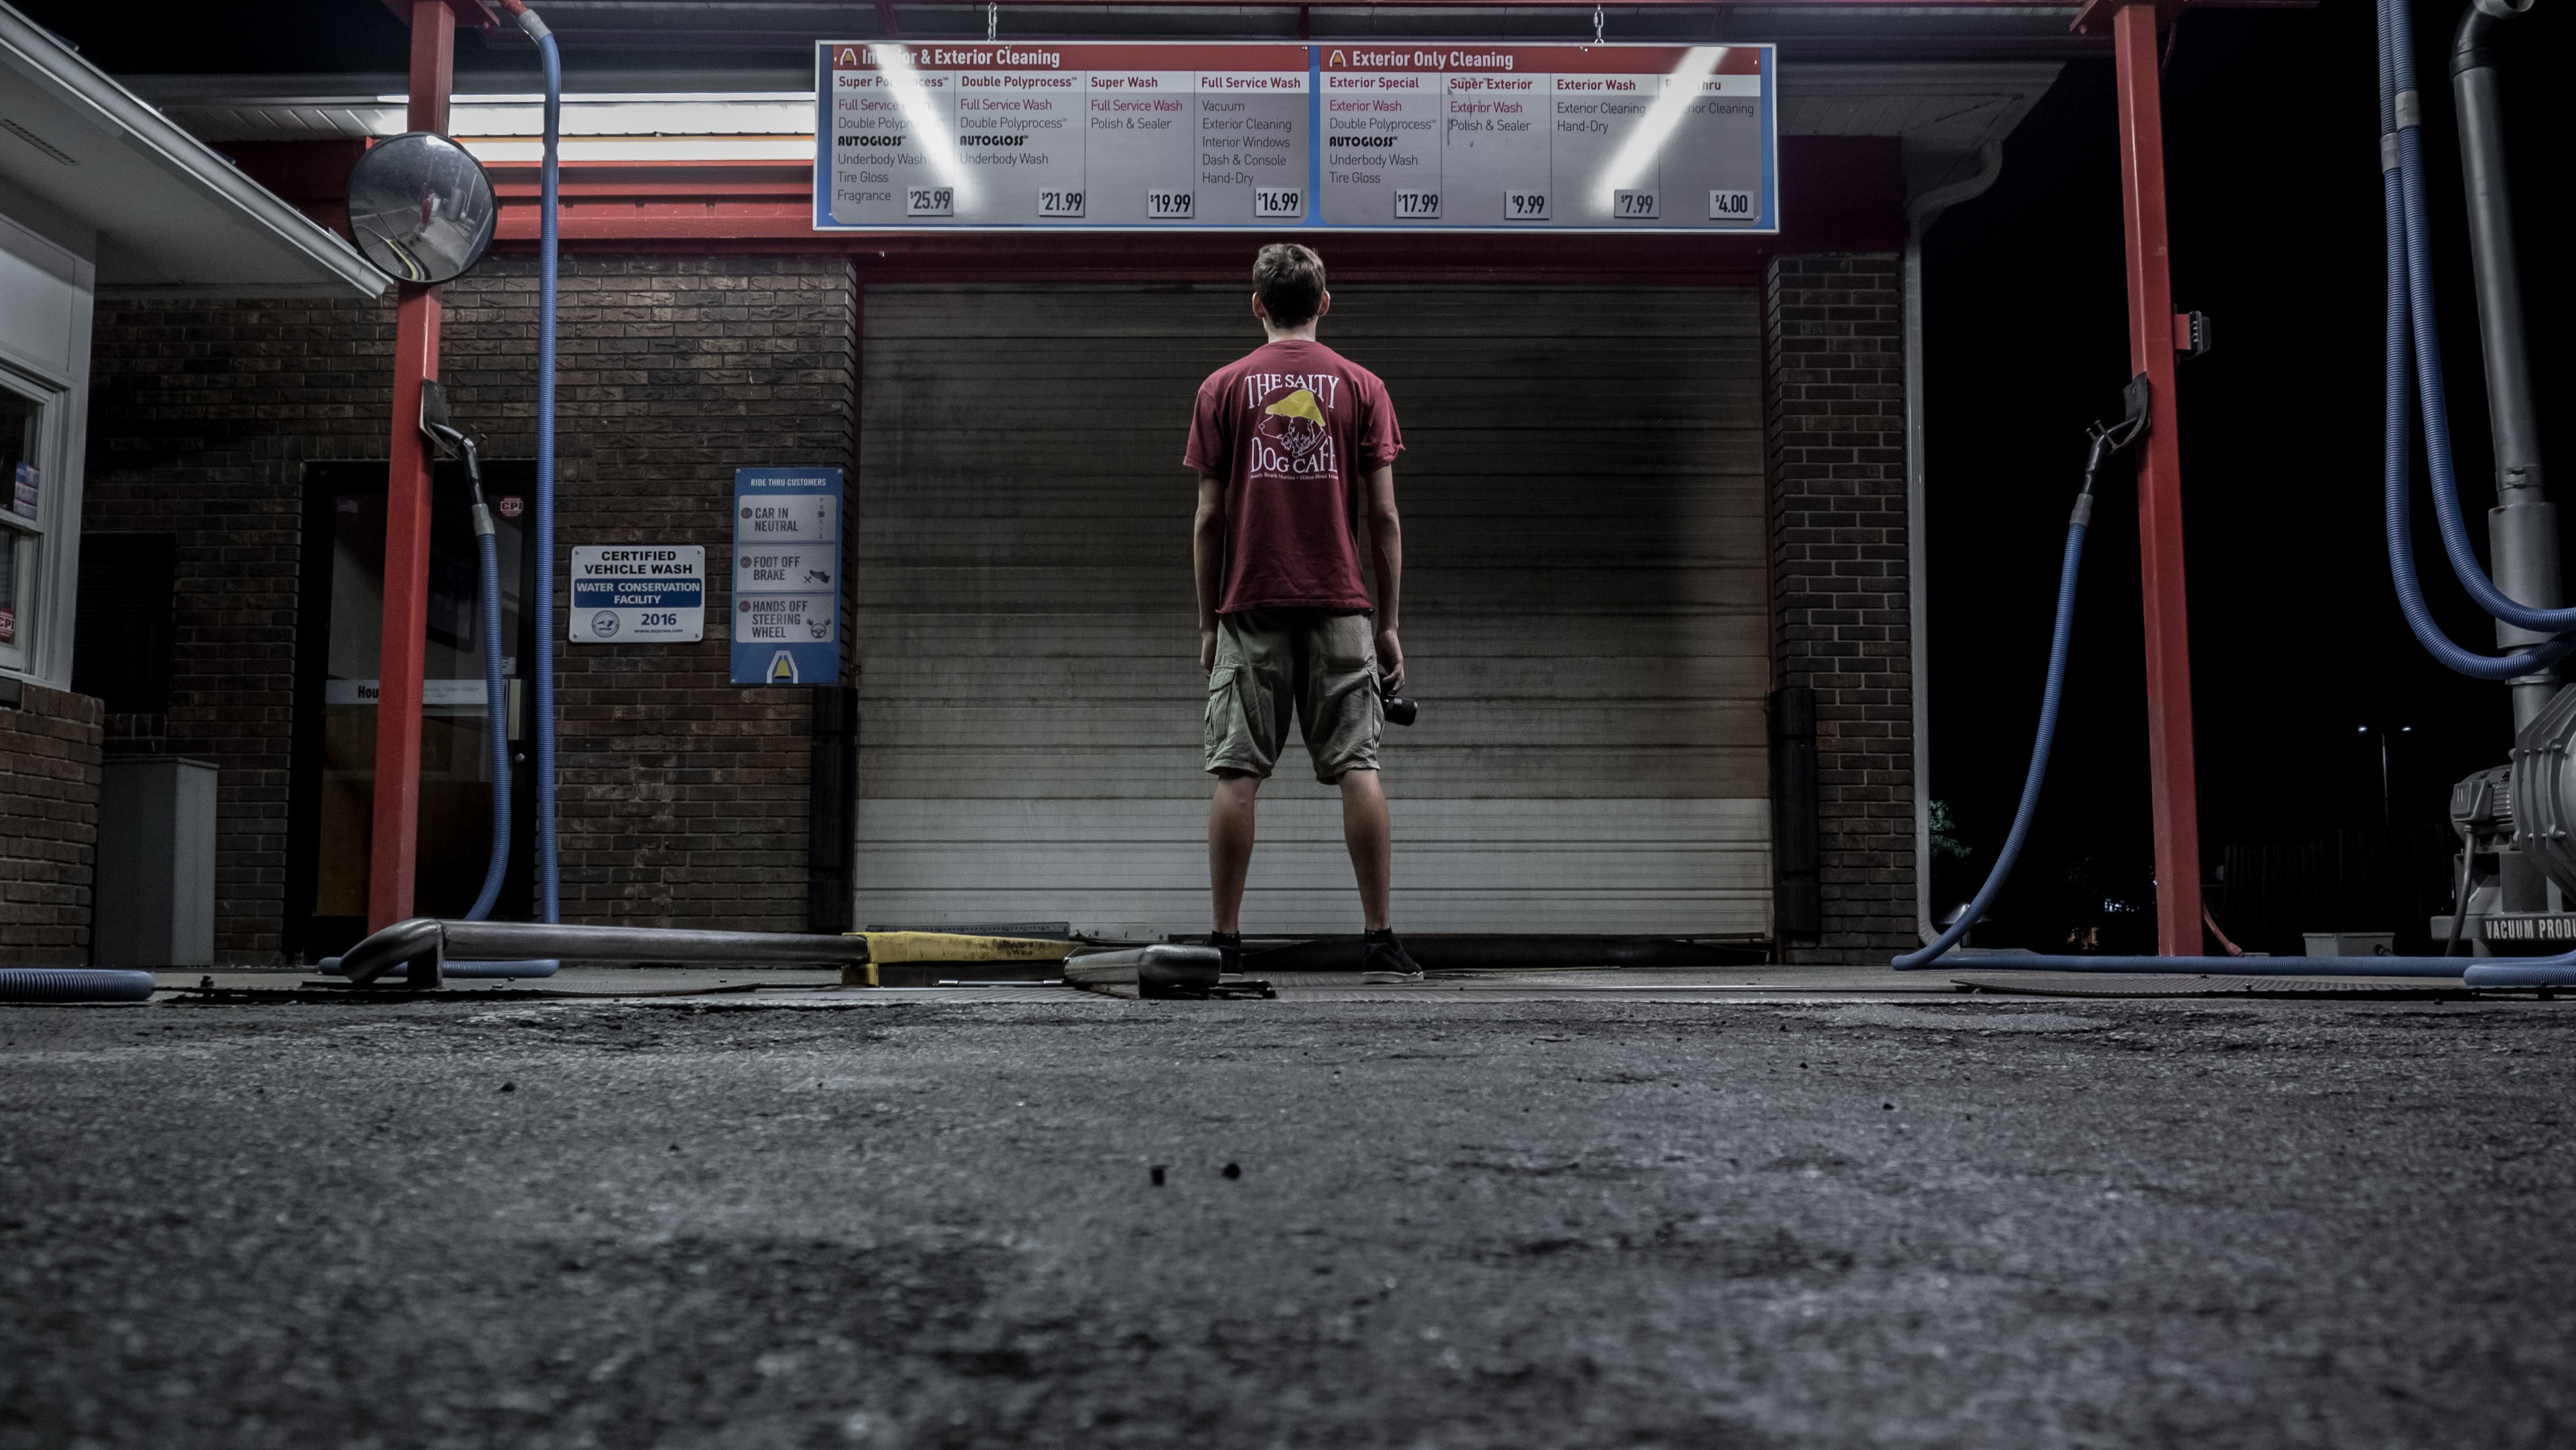 man in red shirt and pair of brown shorts standing on steel shutter door outdoors during nighttime